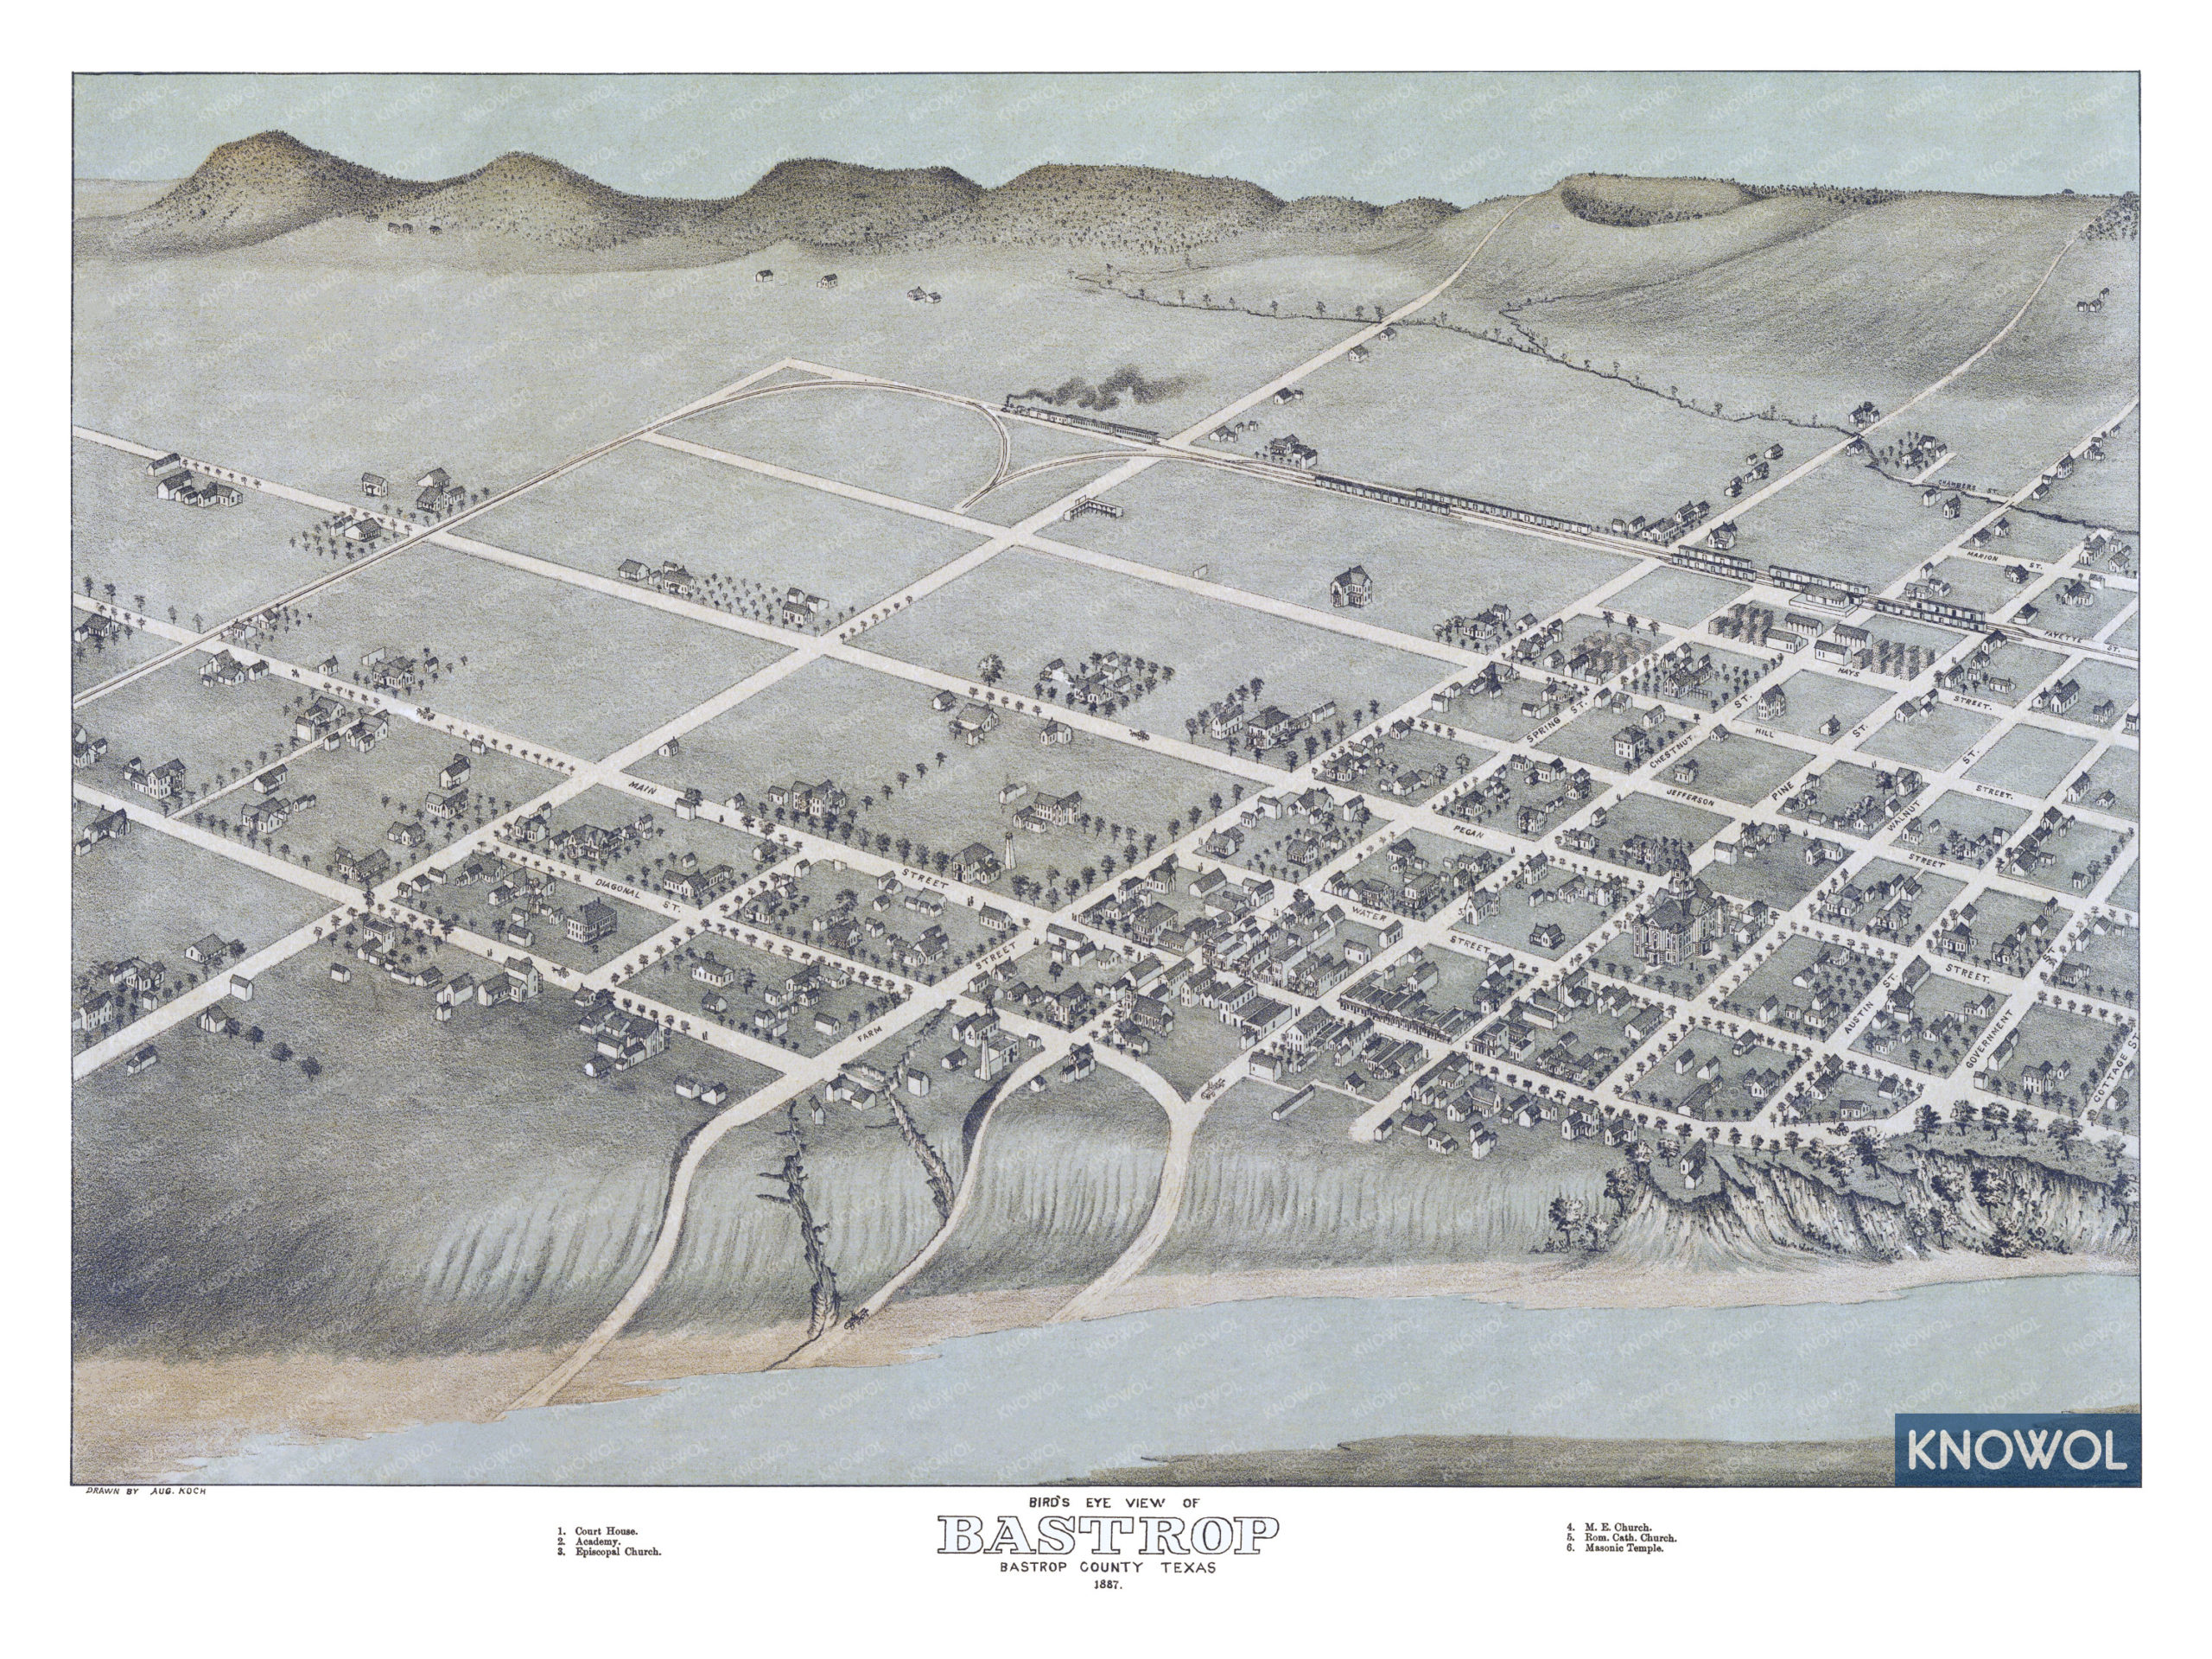 Old map showing a bird's eye view of Bastrop, Texas in 1887. The map is in color and shows the city as it looked in the late 19th century.